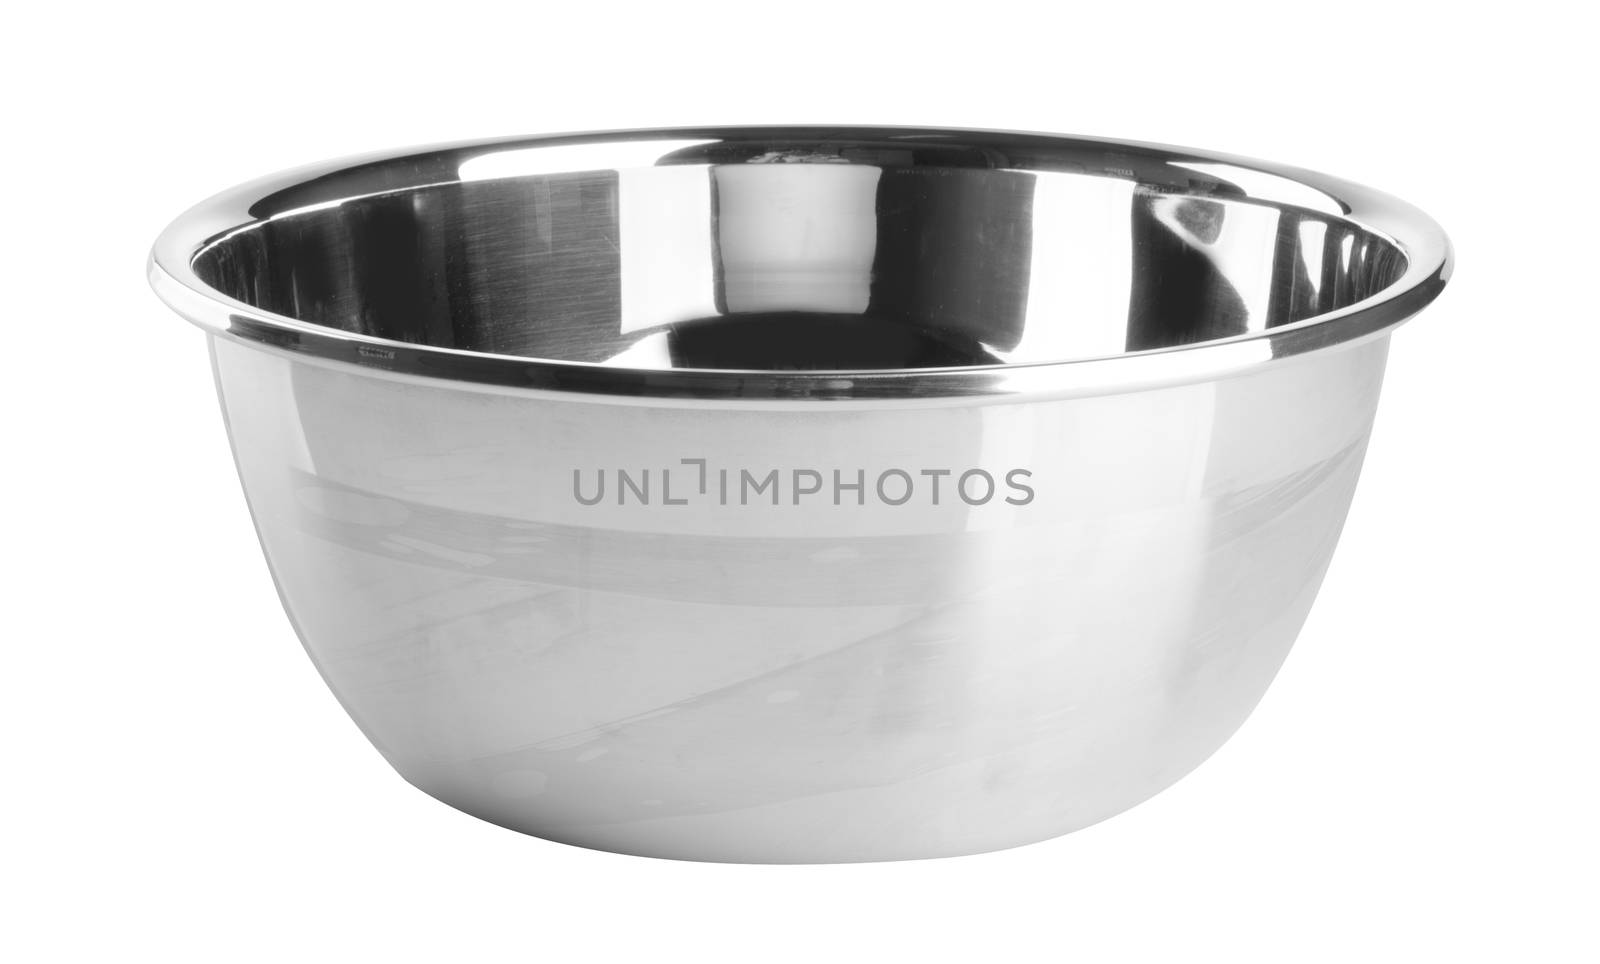 pot. stainless steel pot on background. stainless steel pot on a background